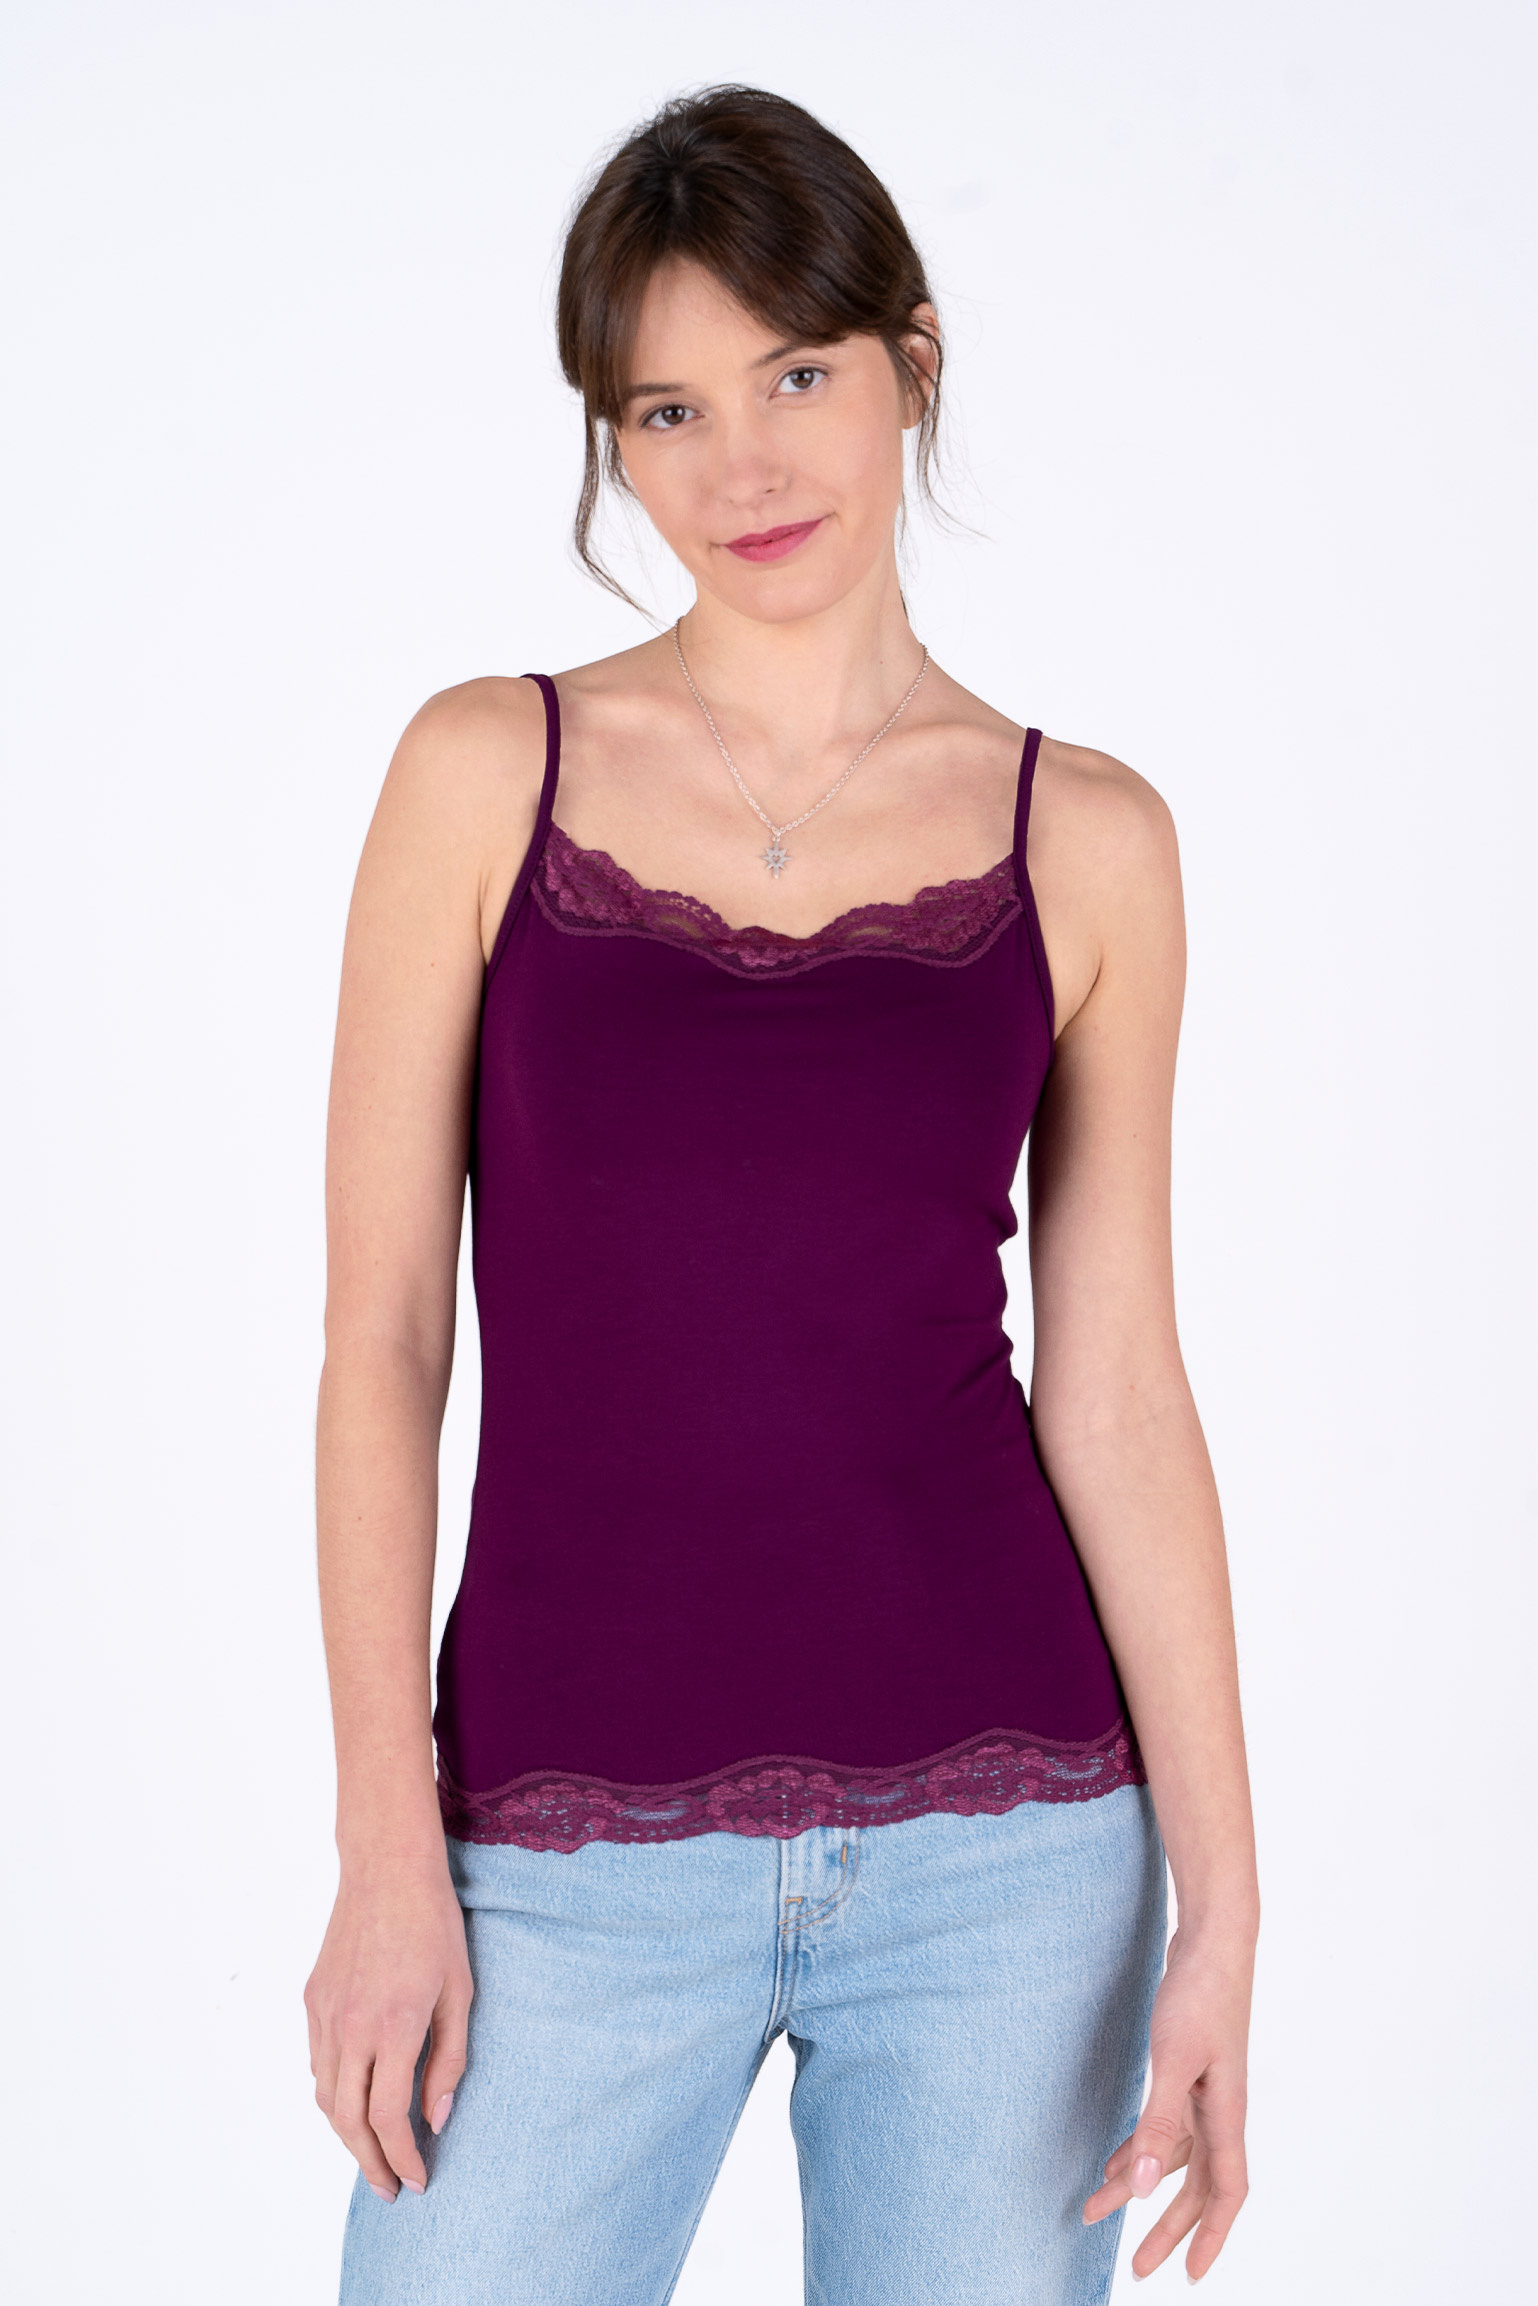 Women's Sexy Ultra Soft Camisole with Lace Trim Cotton Blend Basic